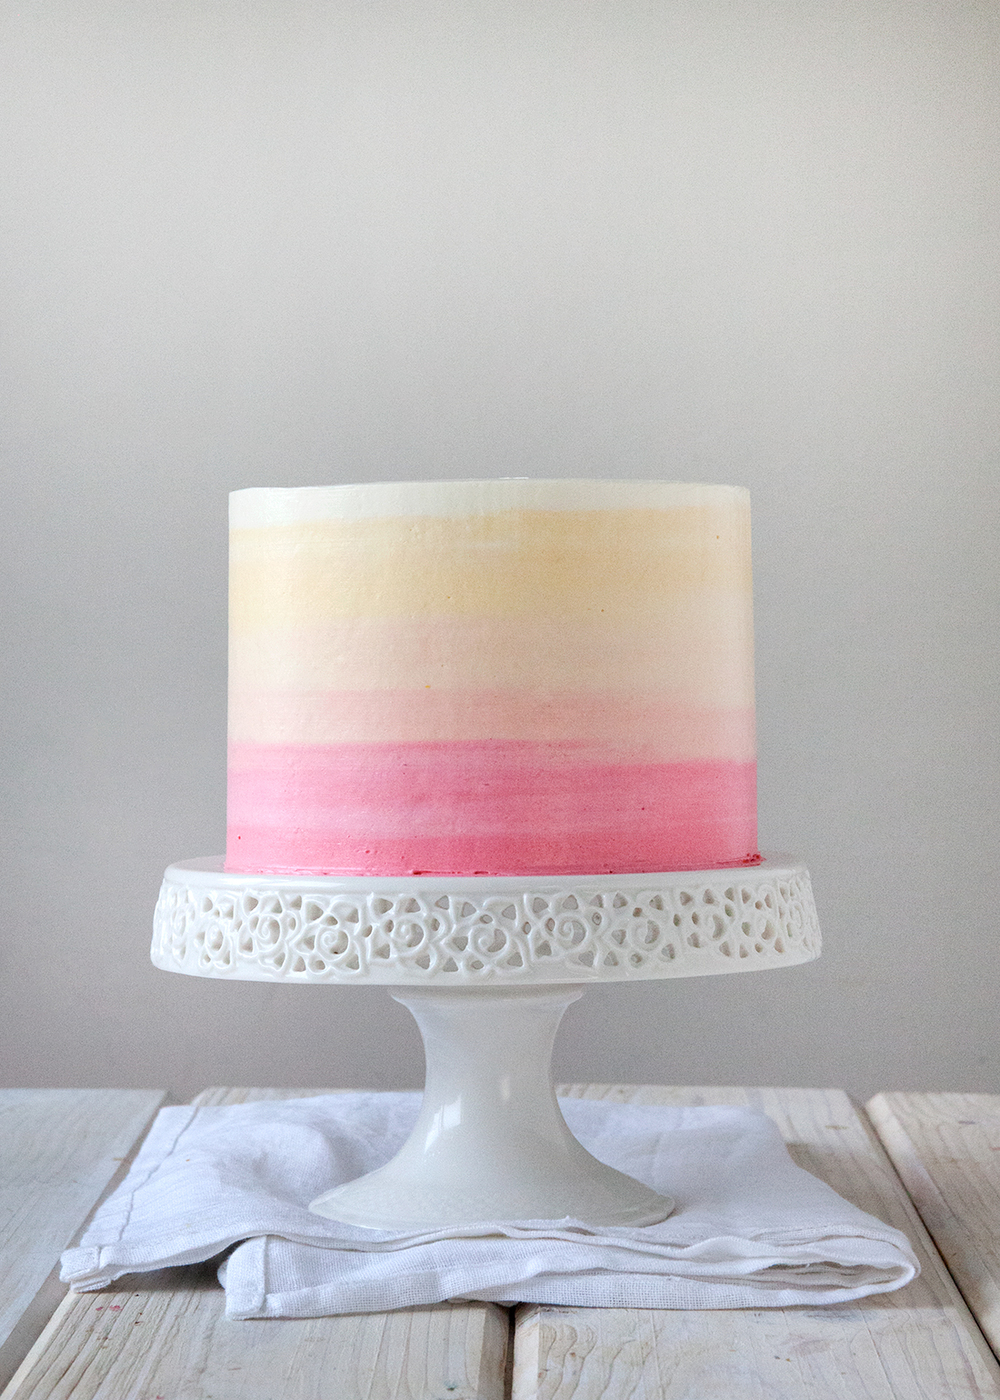 How To Ice A Cake The Perfect Ombre Cake Style Sweet